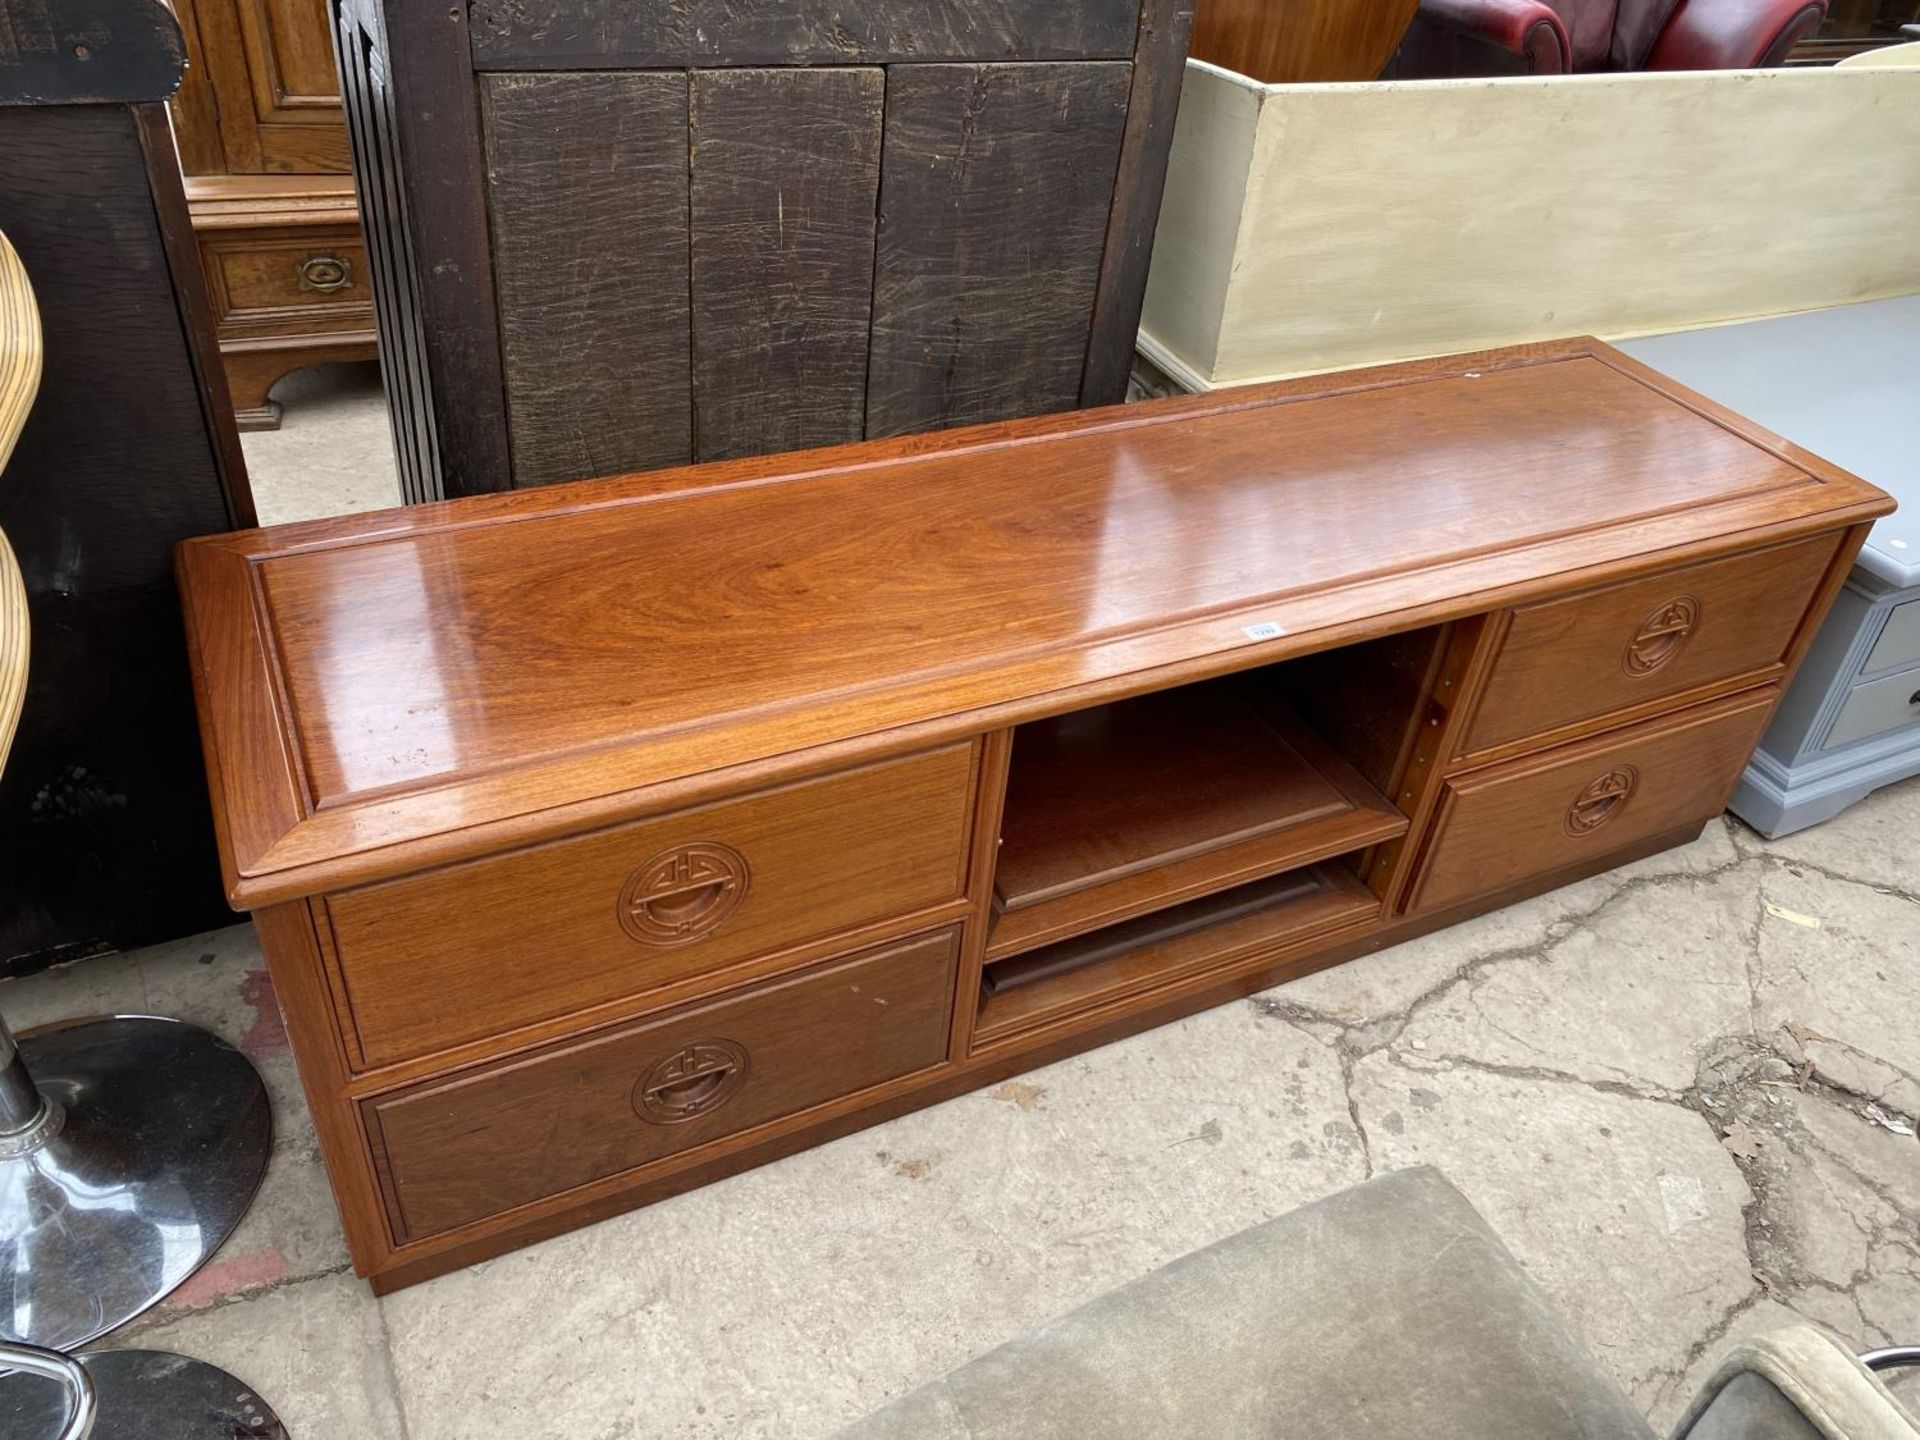 A CHERRY WOOD SIDEBOARD WITH FOUR DRAWERS